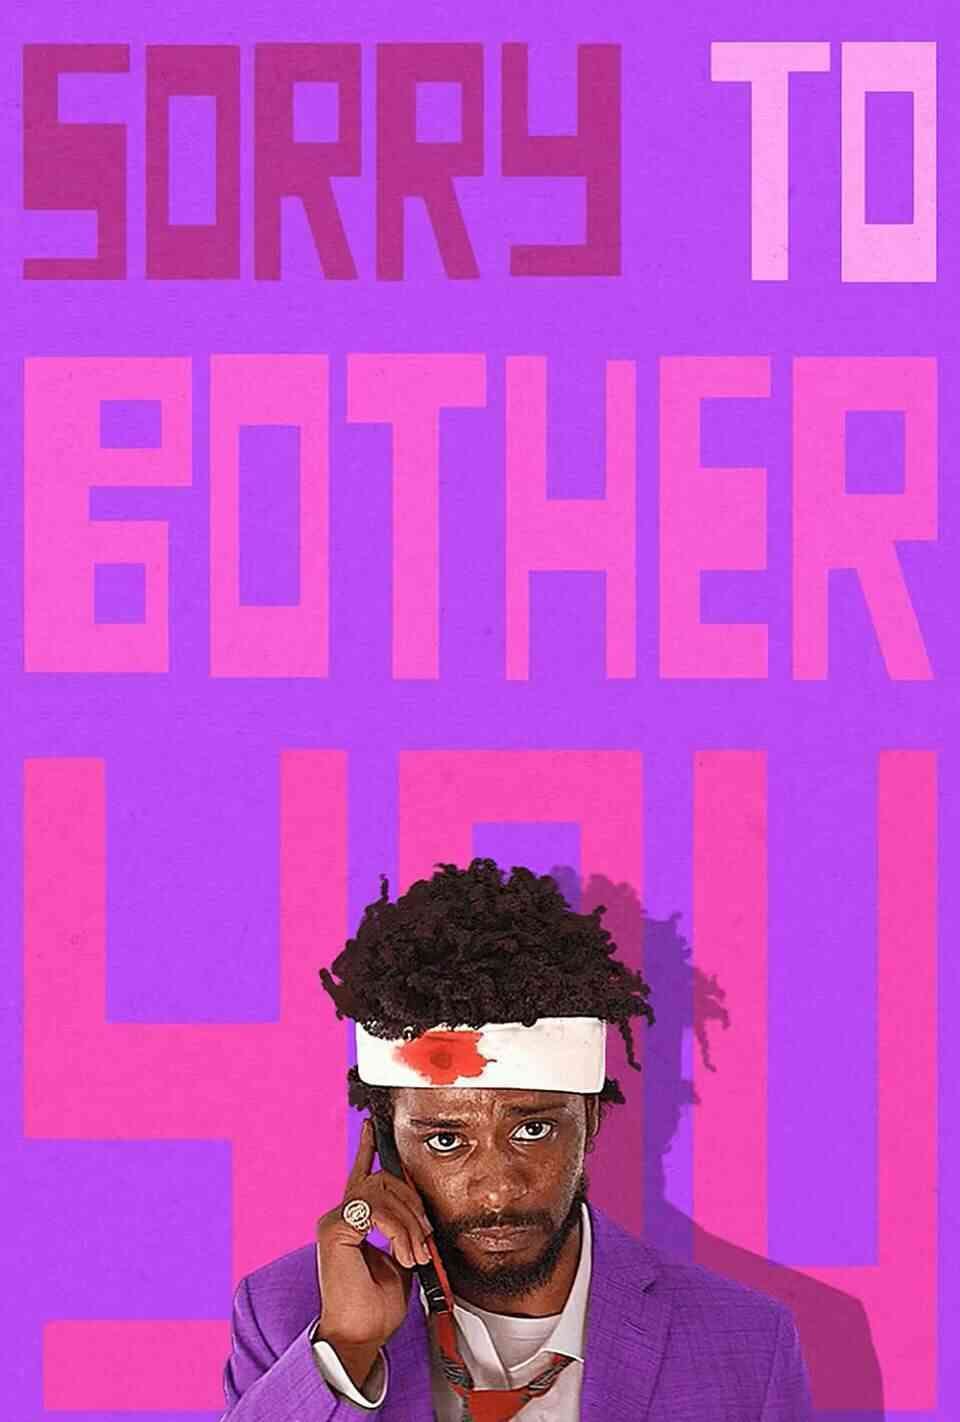 Read Sorry to Bother screenplay (poster)